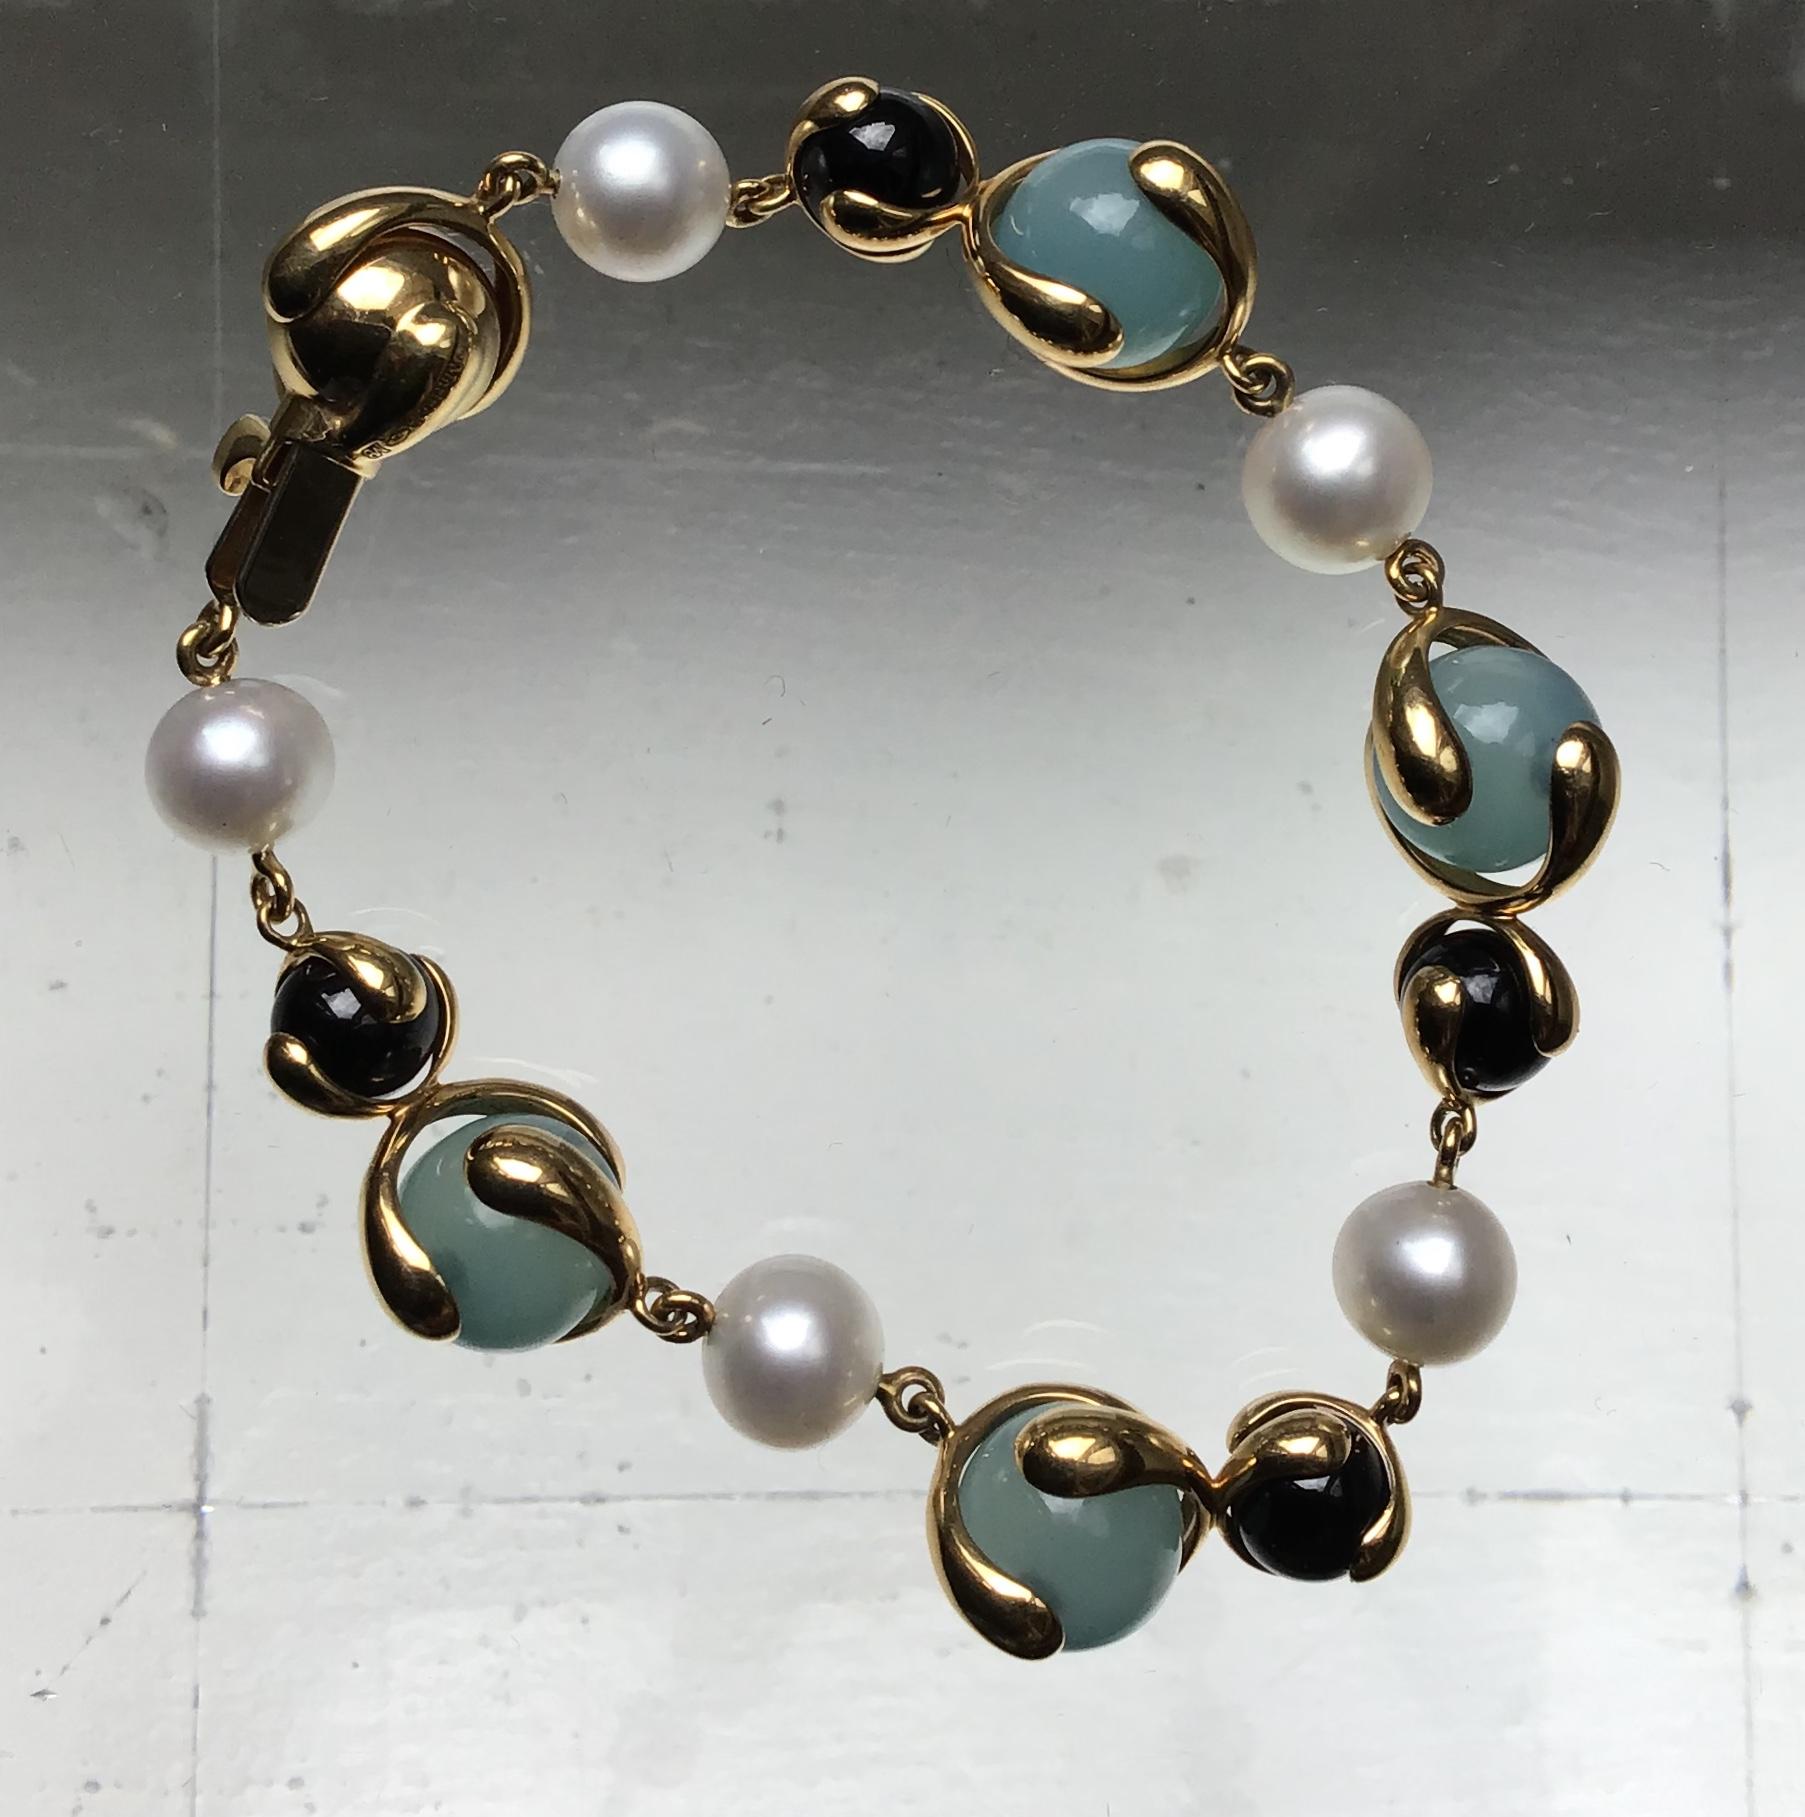 18-Karat Gold Cardan Bracelet with 28.32ct. Blue Chalcedony, 14.45 ct Black Jade, 15.15 ct. Pearl and 0.45 ct. Round Diamonds

Polished 18-karat yellow gold hardware and frame

Signed Marina B, Made in Italy and numbered 580072